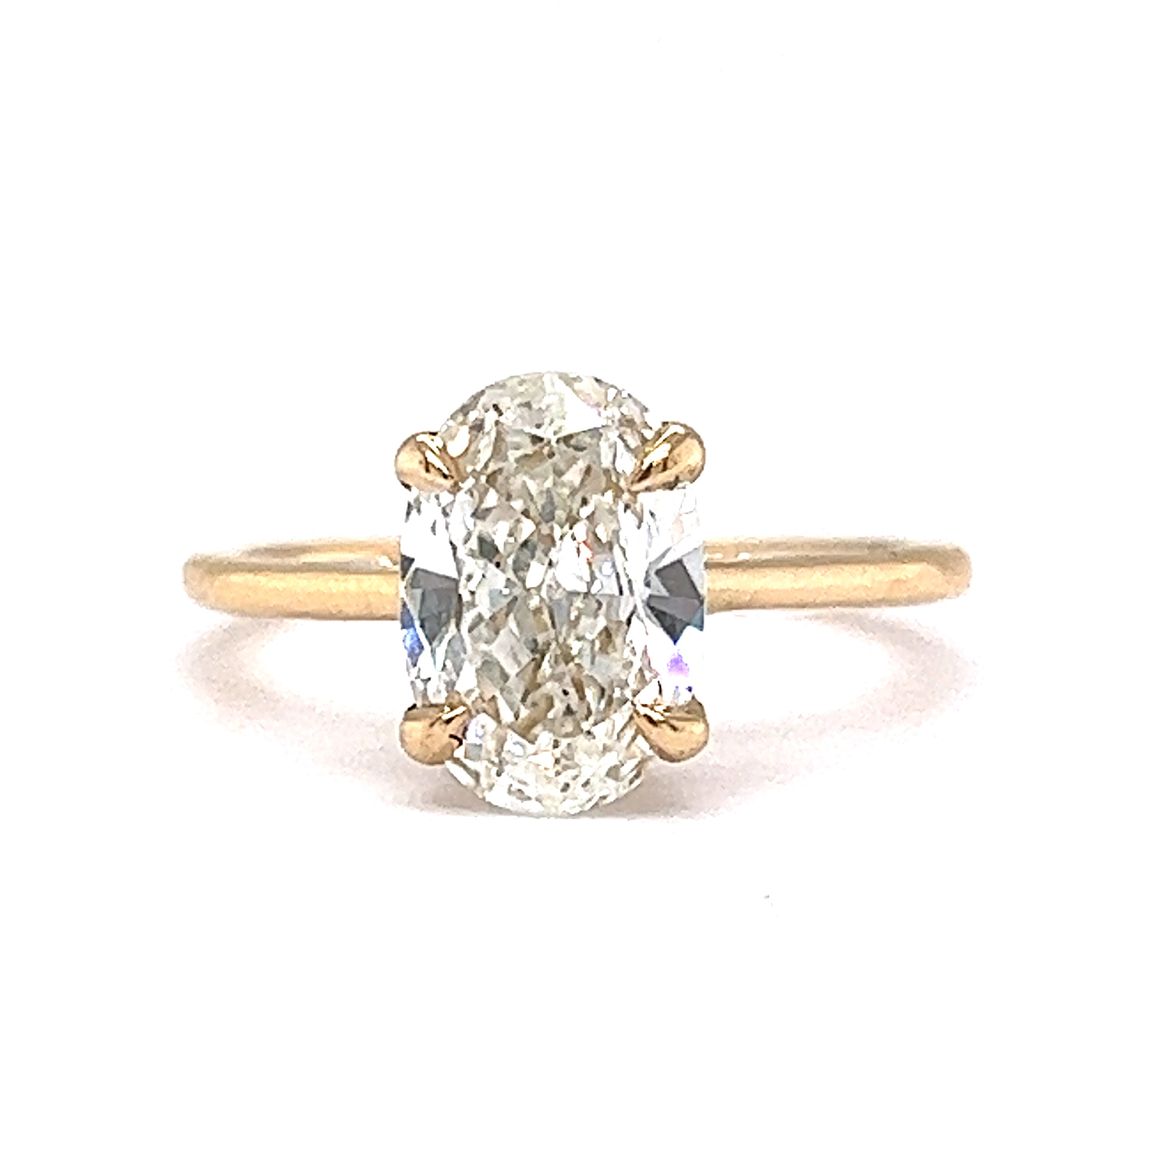 1.62 Oval Diamond Solitaire Engagement Ring in 14k Yellow GoldComposition: 14 Karat Yellow Gold Ring Size: 5.5 Total Diamond Weight: 1.62ct Total Gram Weight: 2.30 g Inscription: 14k
      